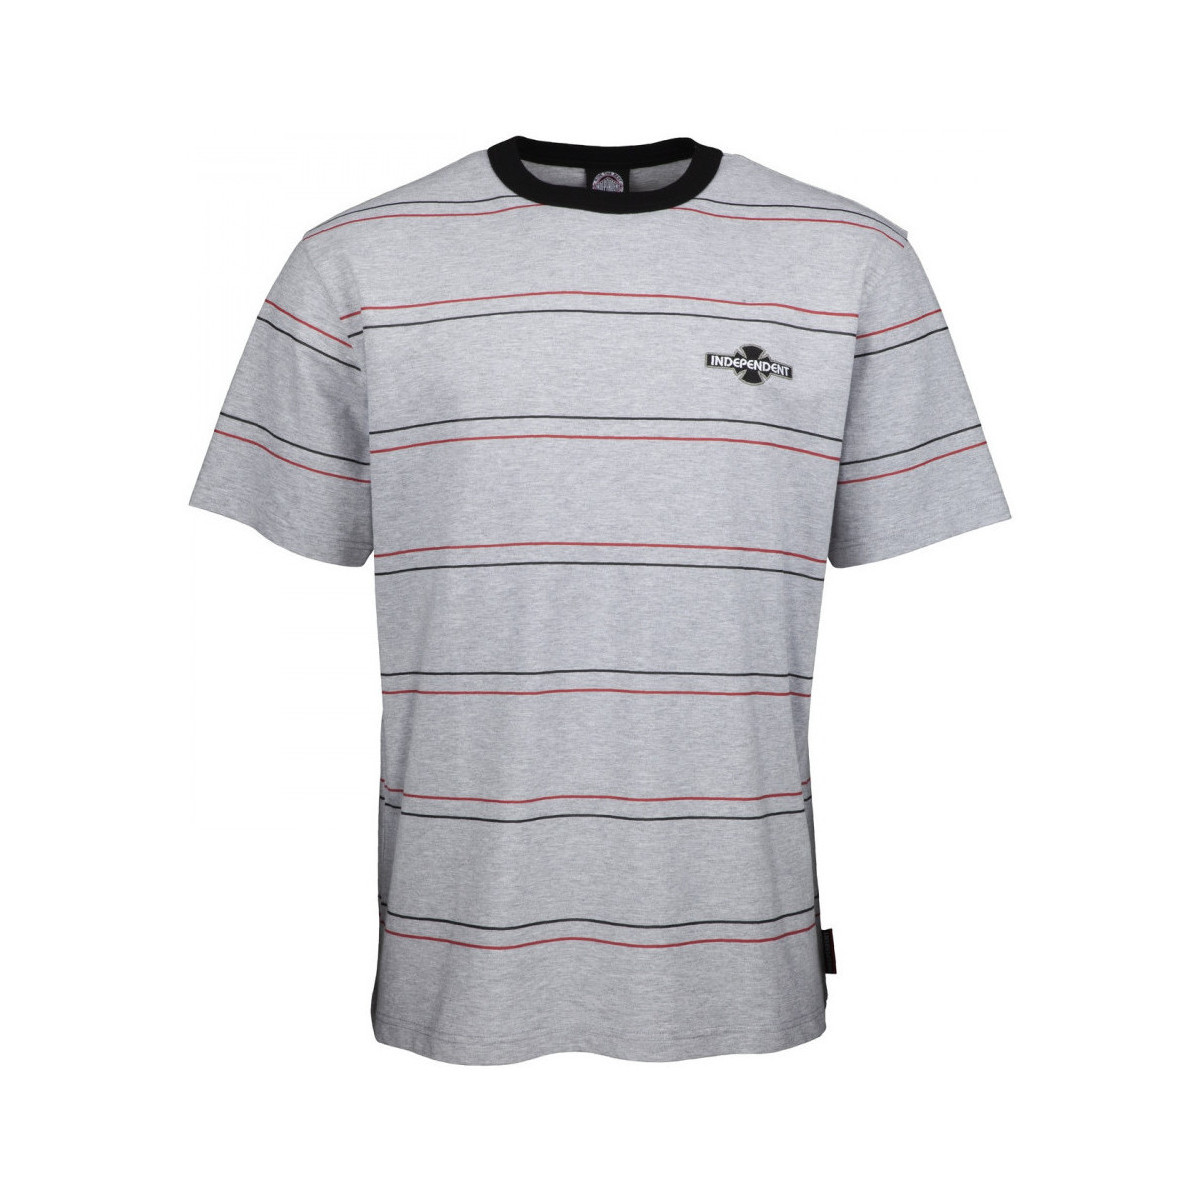 Vêtements Homme T-shirts & Polos Independent O.g.b.c standard tee Gris